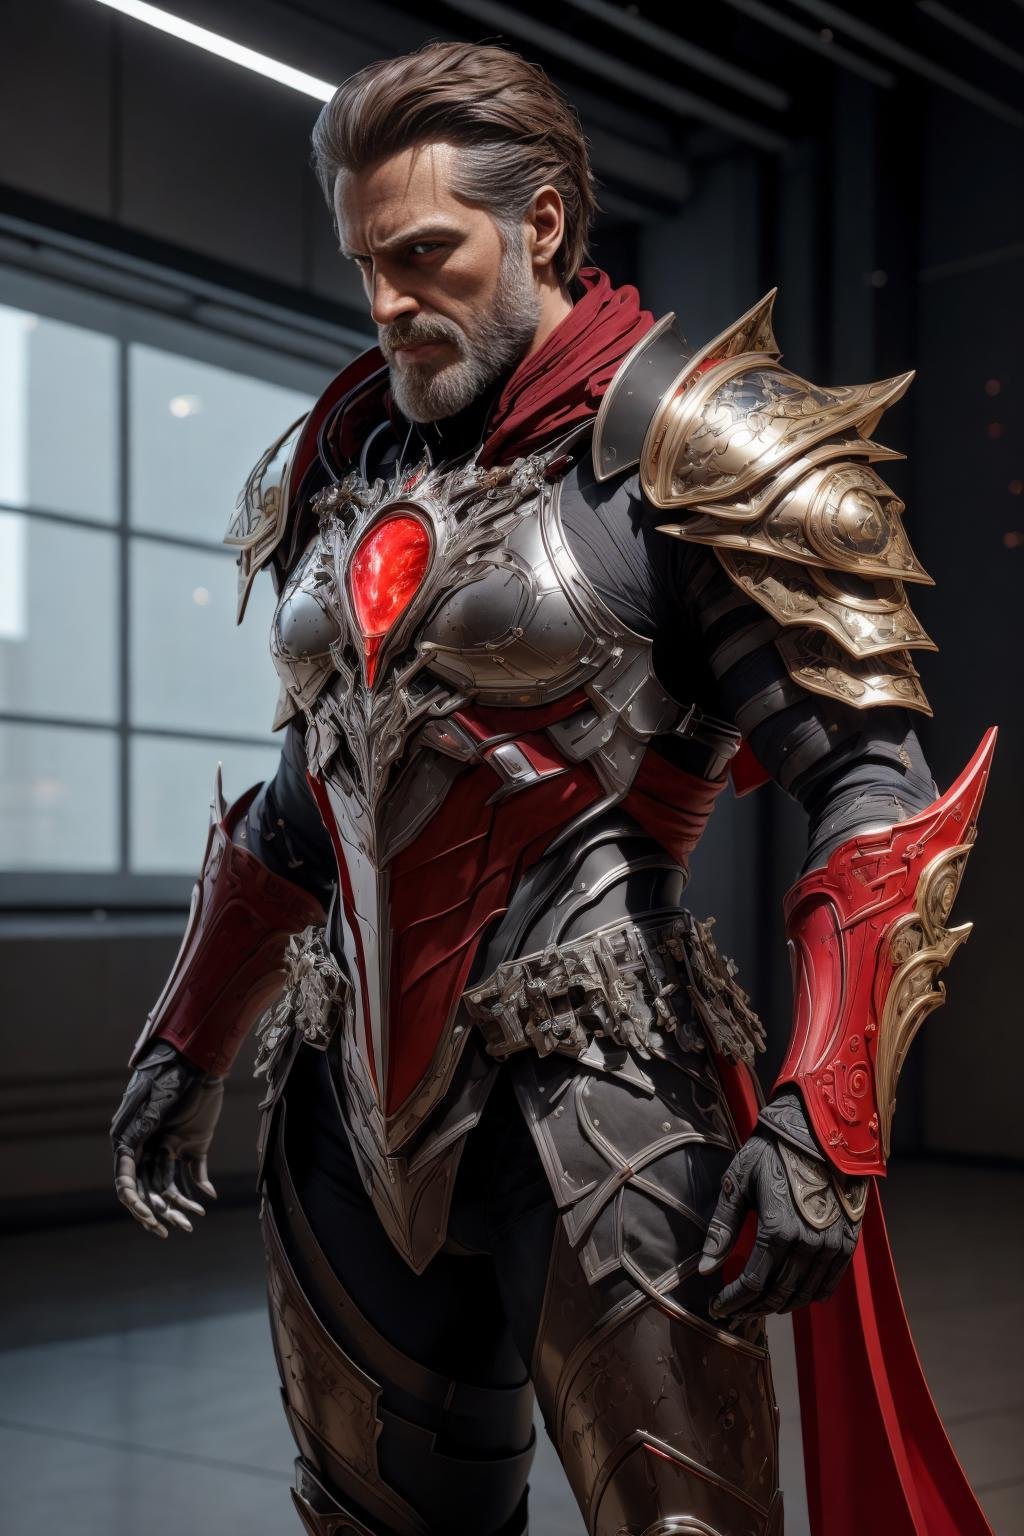 <lora:hades_armor_v3:0.7>masterpiece, best quality, intricate details, highly detailed raw photography, photorealism, photorealistic, Real-Time Ray Tracing lighting, volumetric lighting, volumetric shadows, 8k-perfect-octaneolder man in Comic Book Red hades_armor, shoulder armor, pauldrons, breastplate, armor reflexions, red scarf, sideburns, ((knees apart feet together)), perfect sharp eyesspace station city background withA place with a lot of glass details in silver and gold, Bokeh Background Lights 